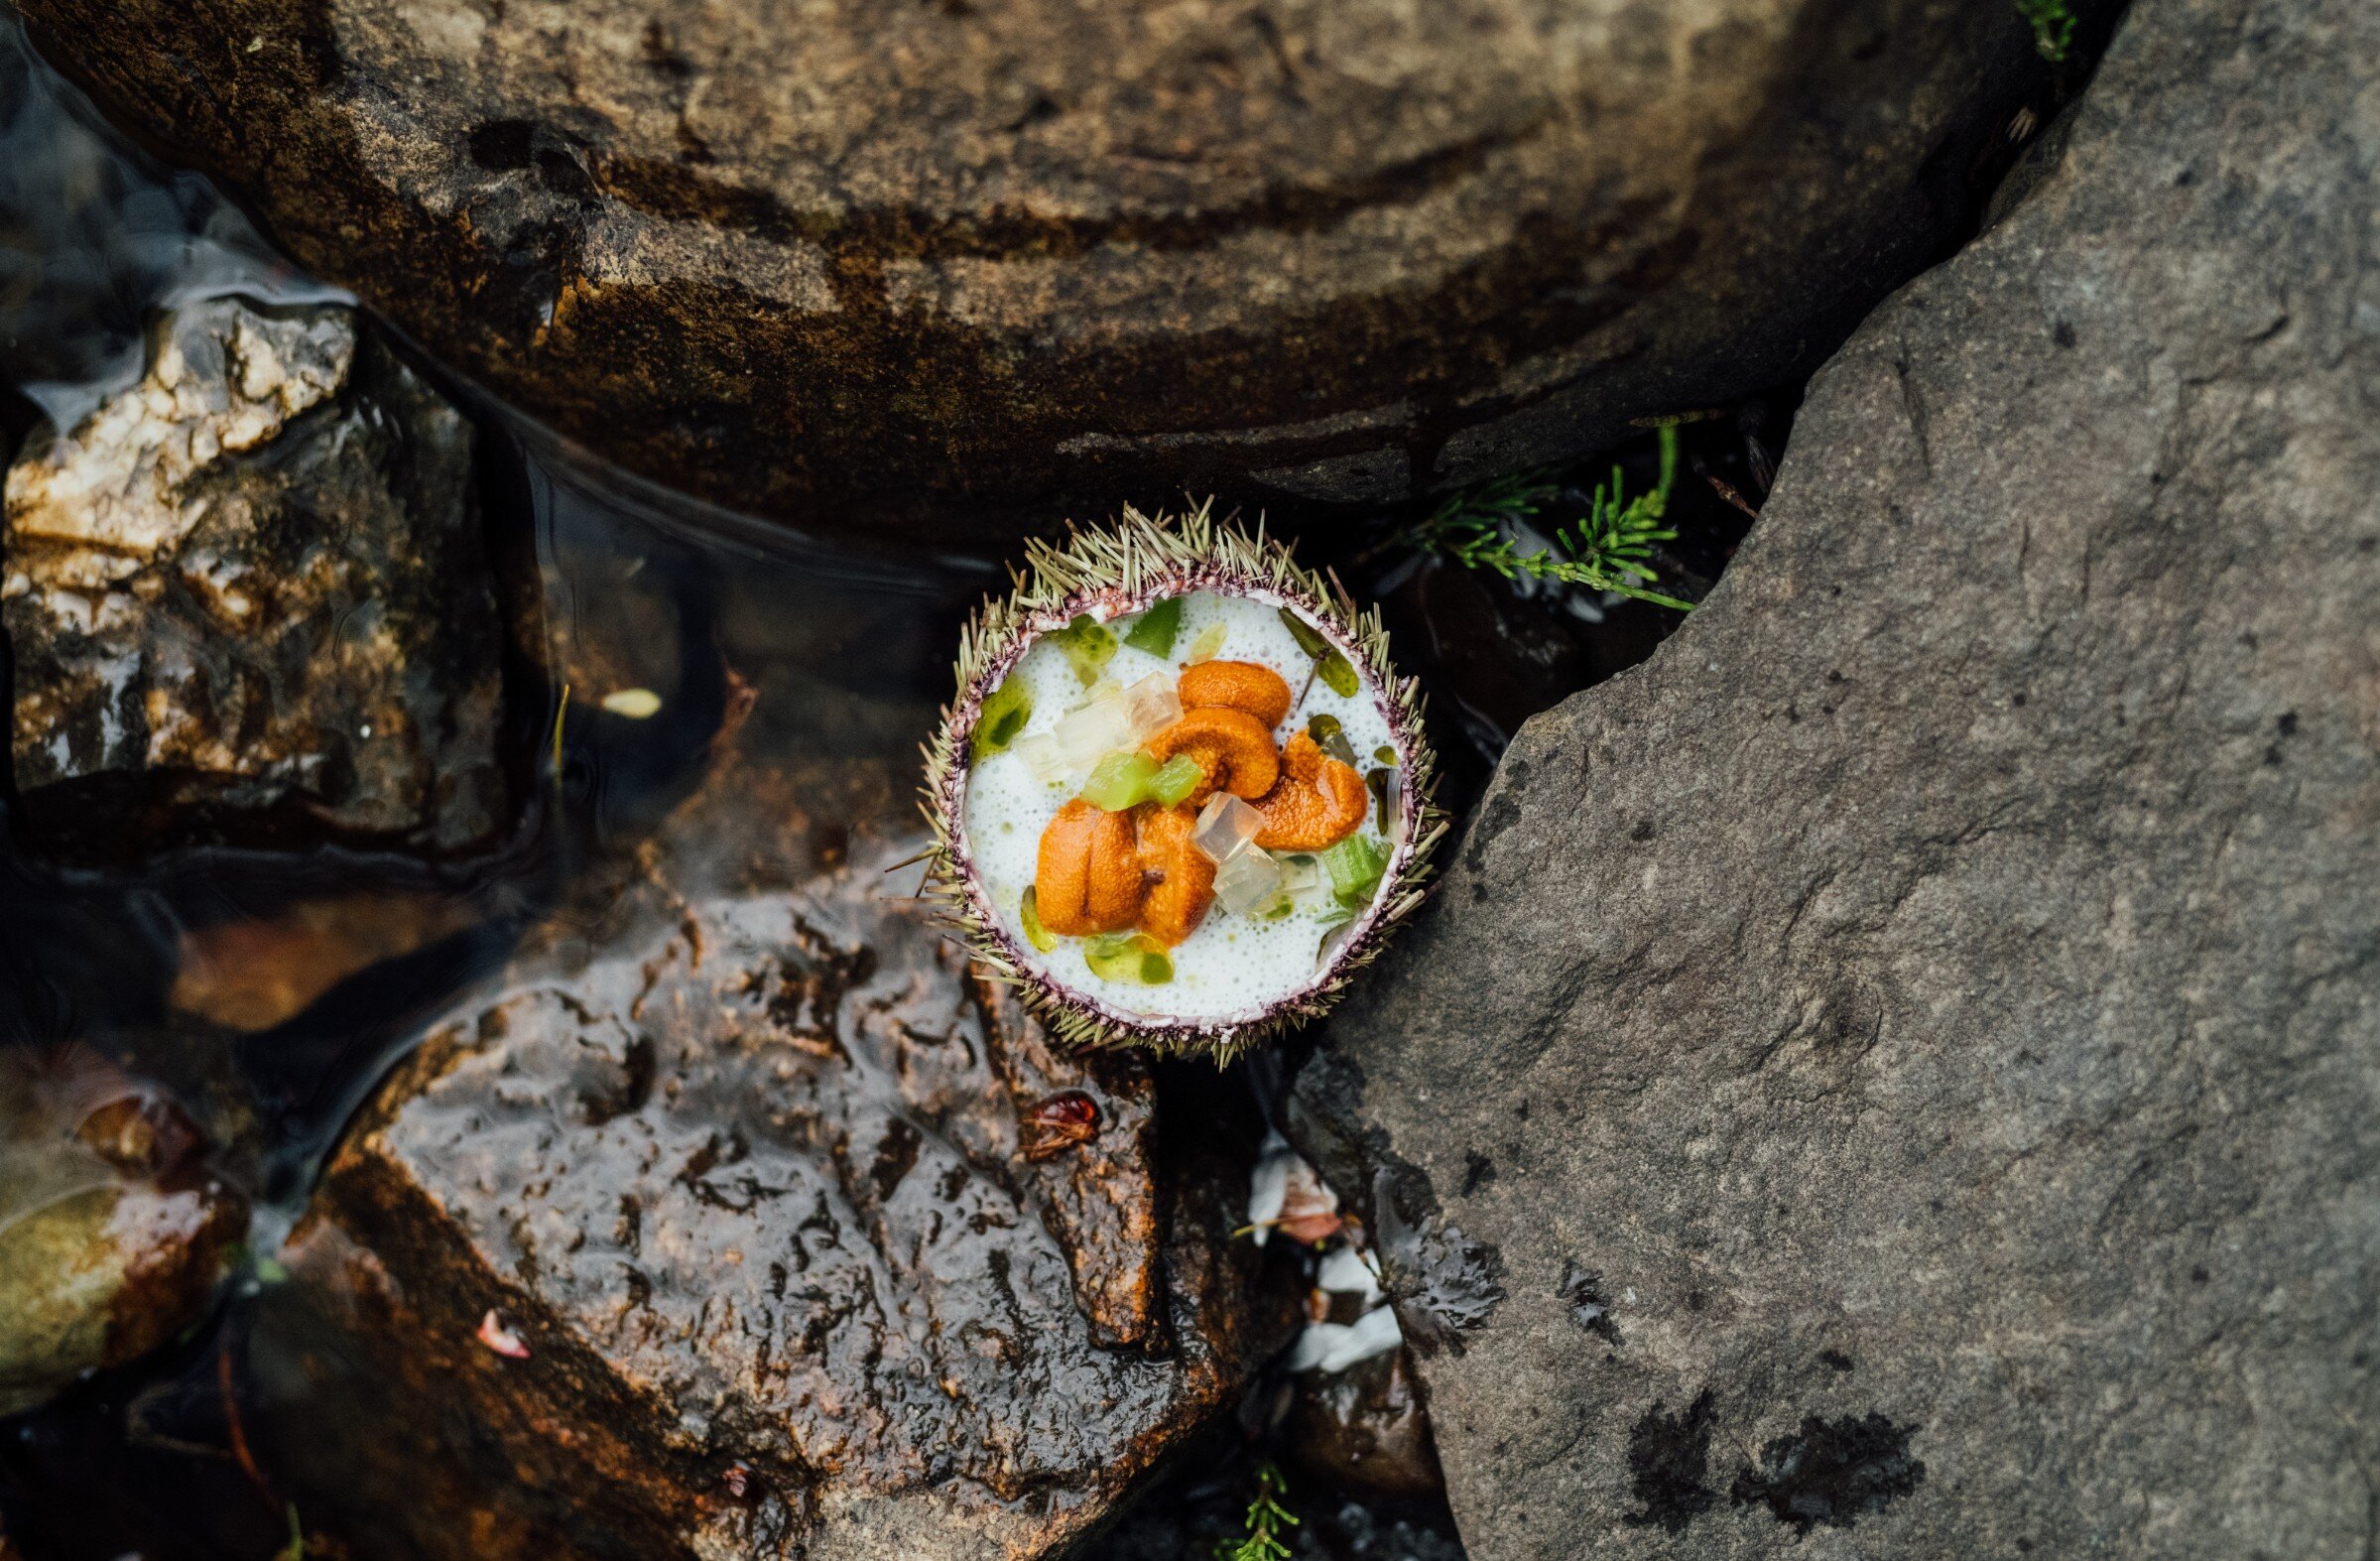 A sea urchin by the water